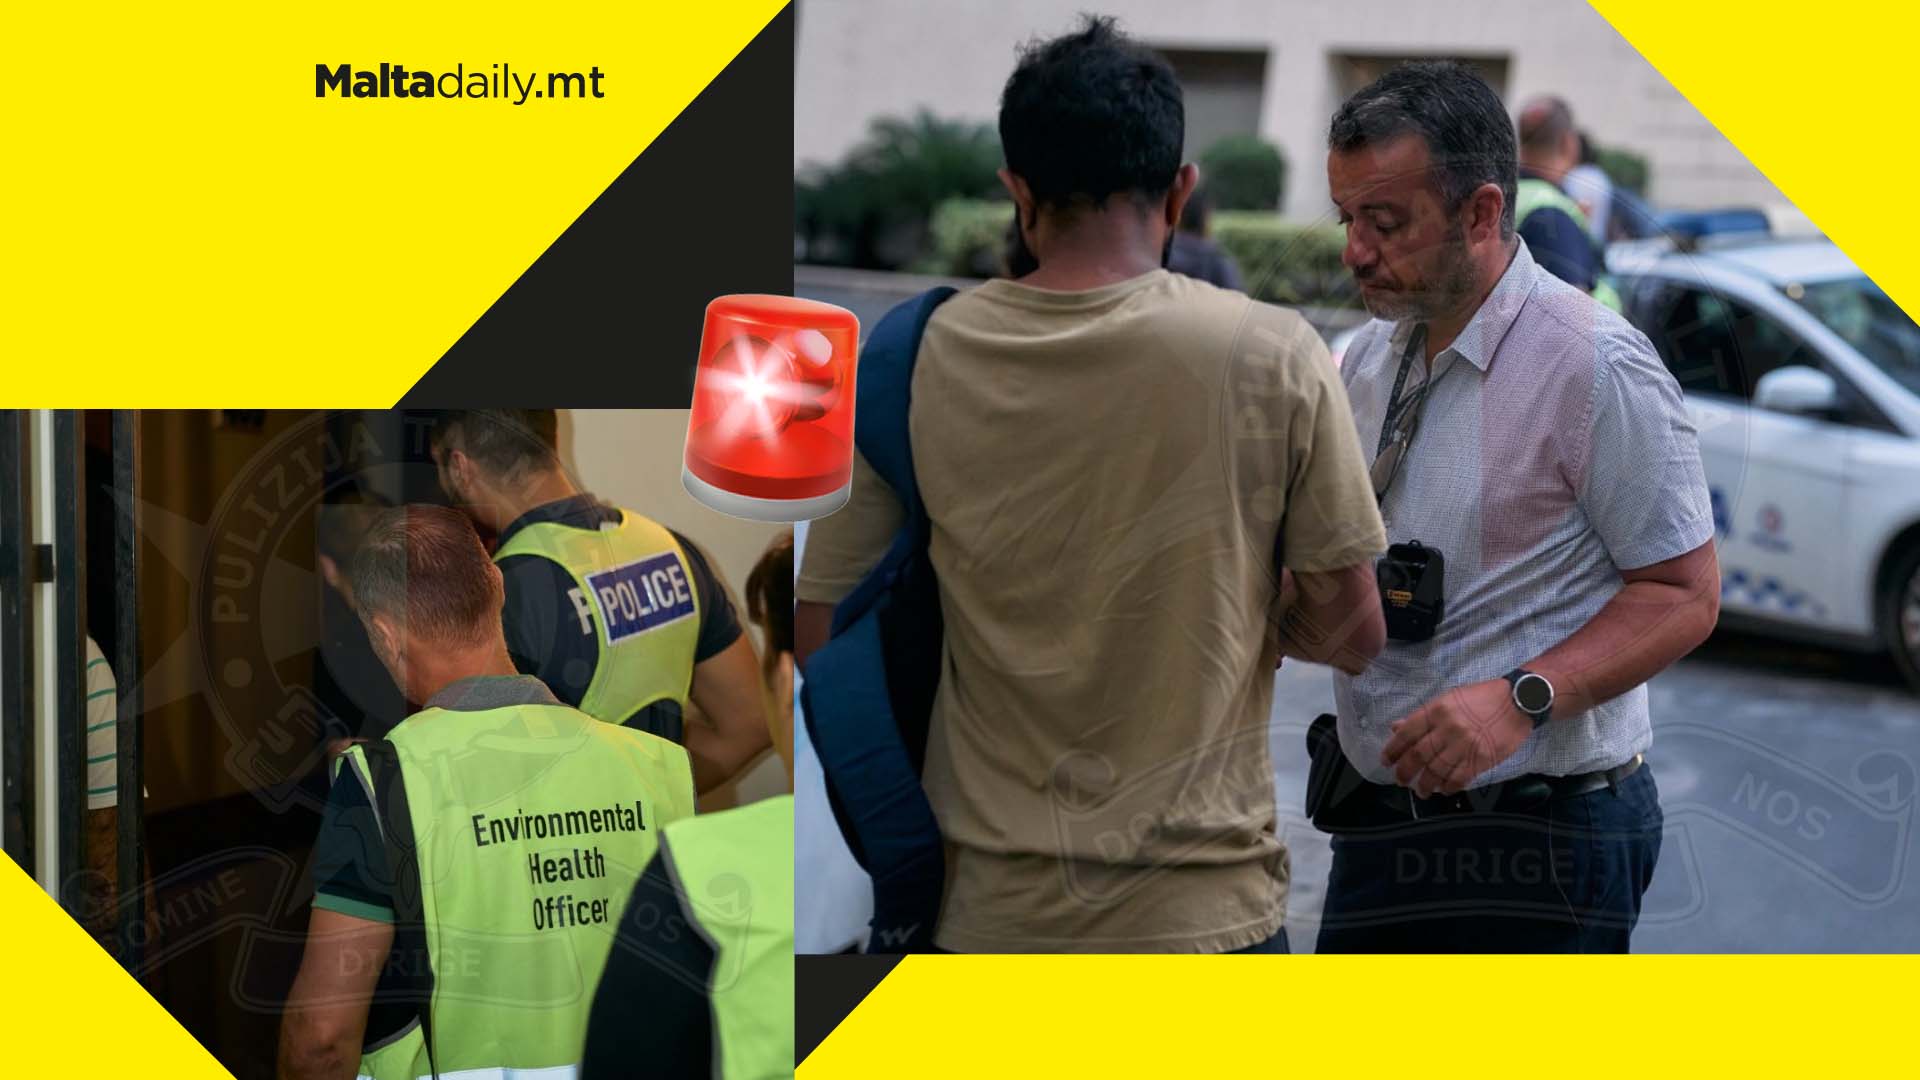 22 people arrested for living in Malta irregularly in St Julian’s